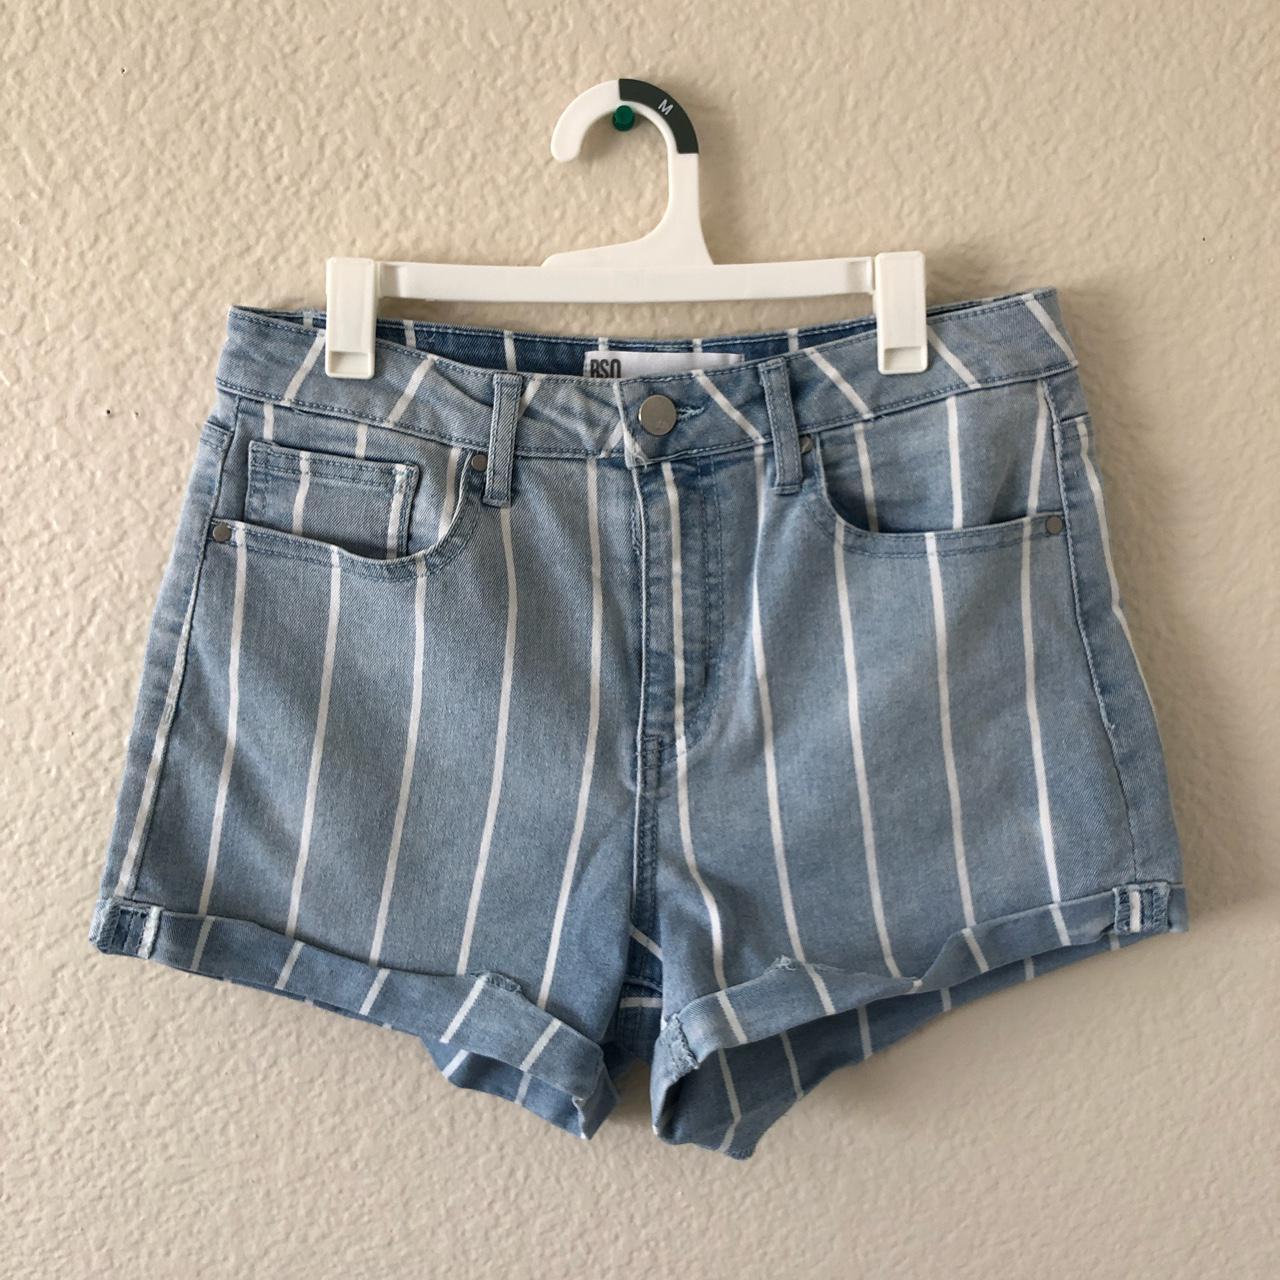 PacSun Women's Blue and White Shorts | Depop